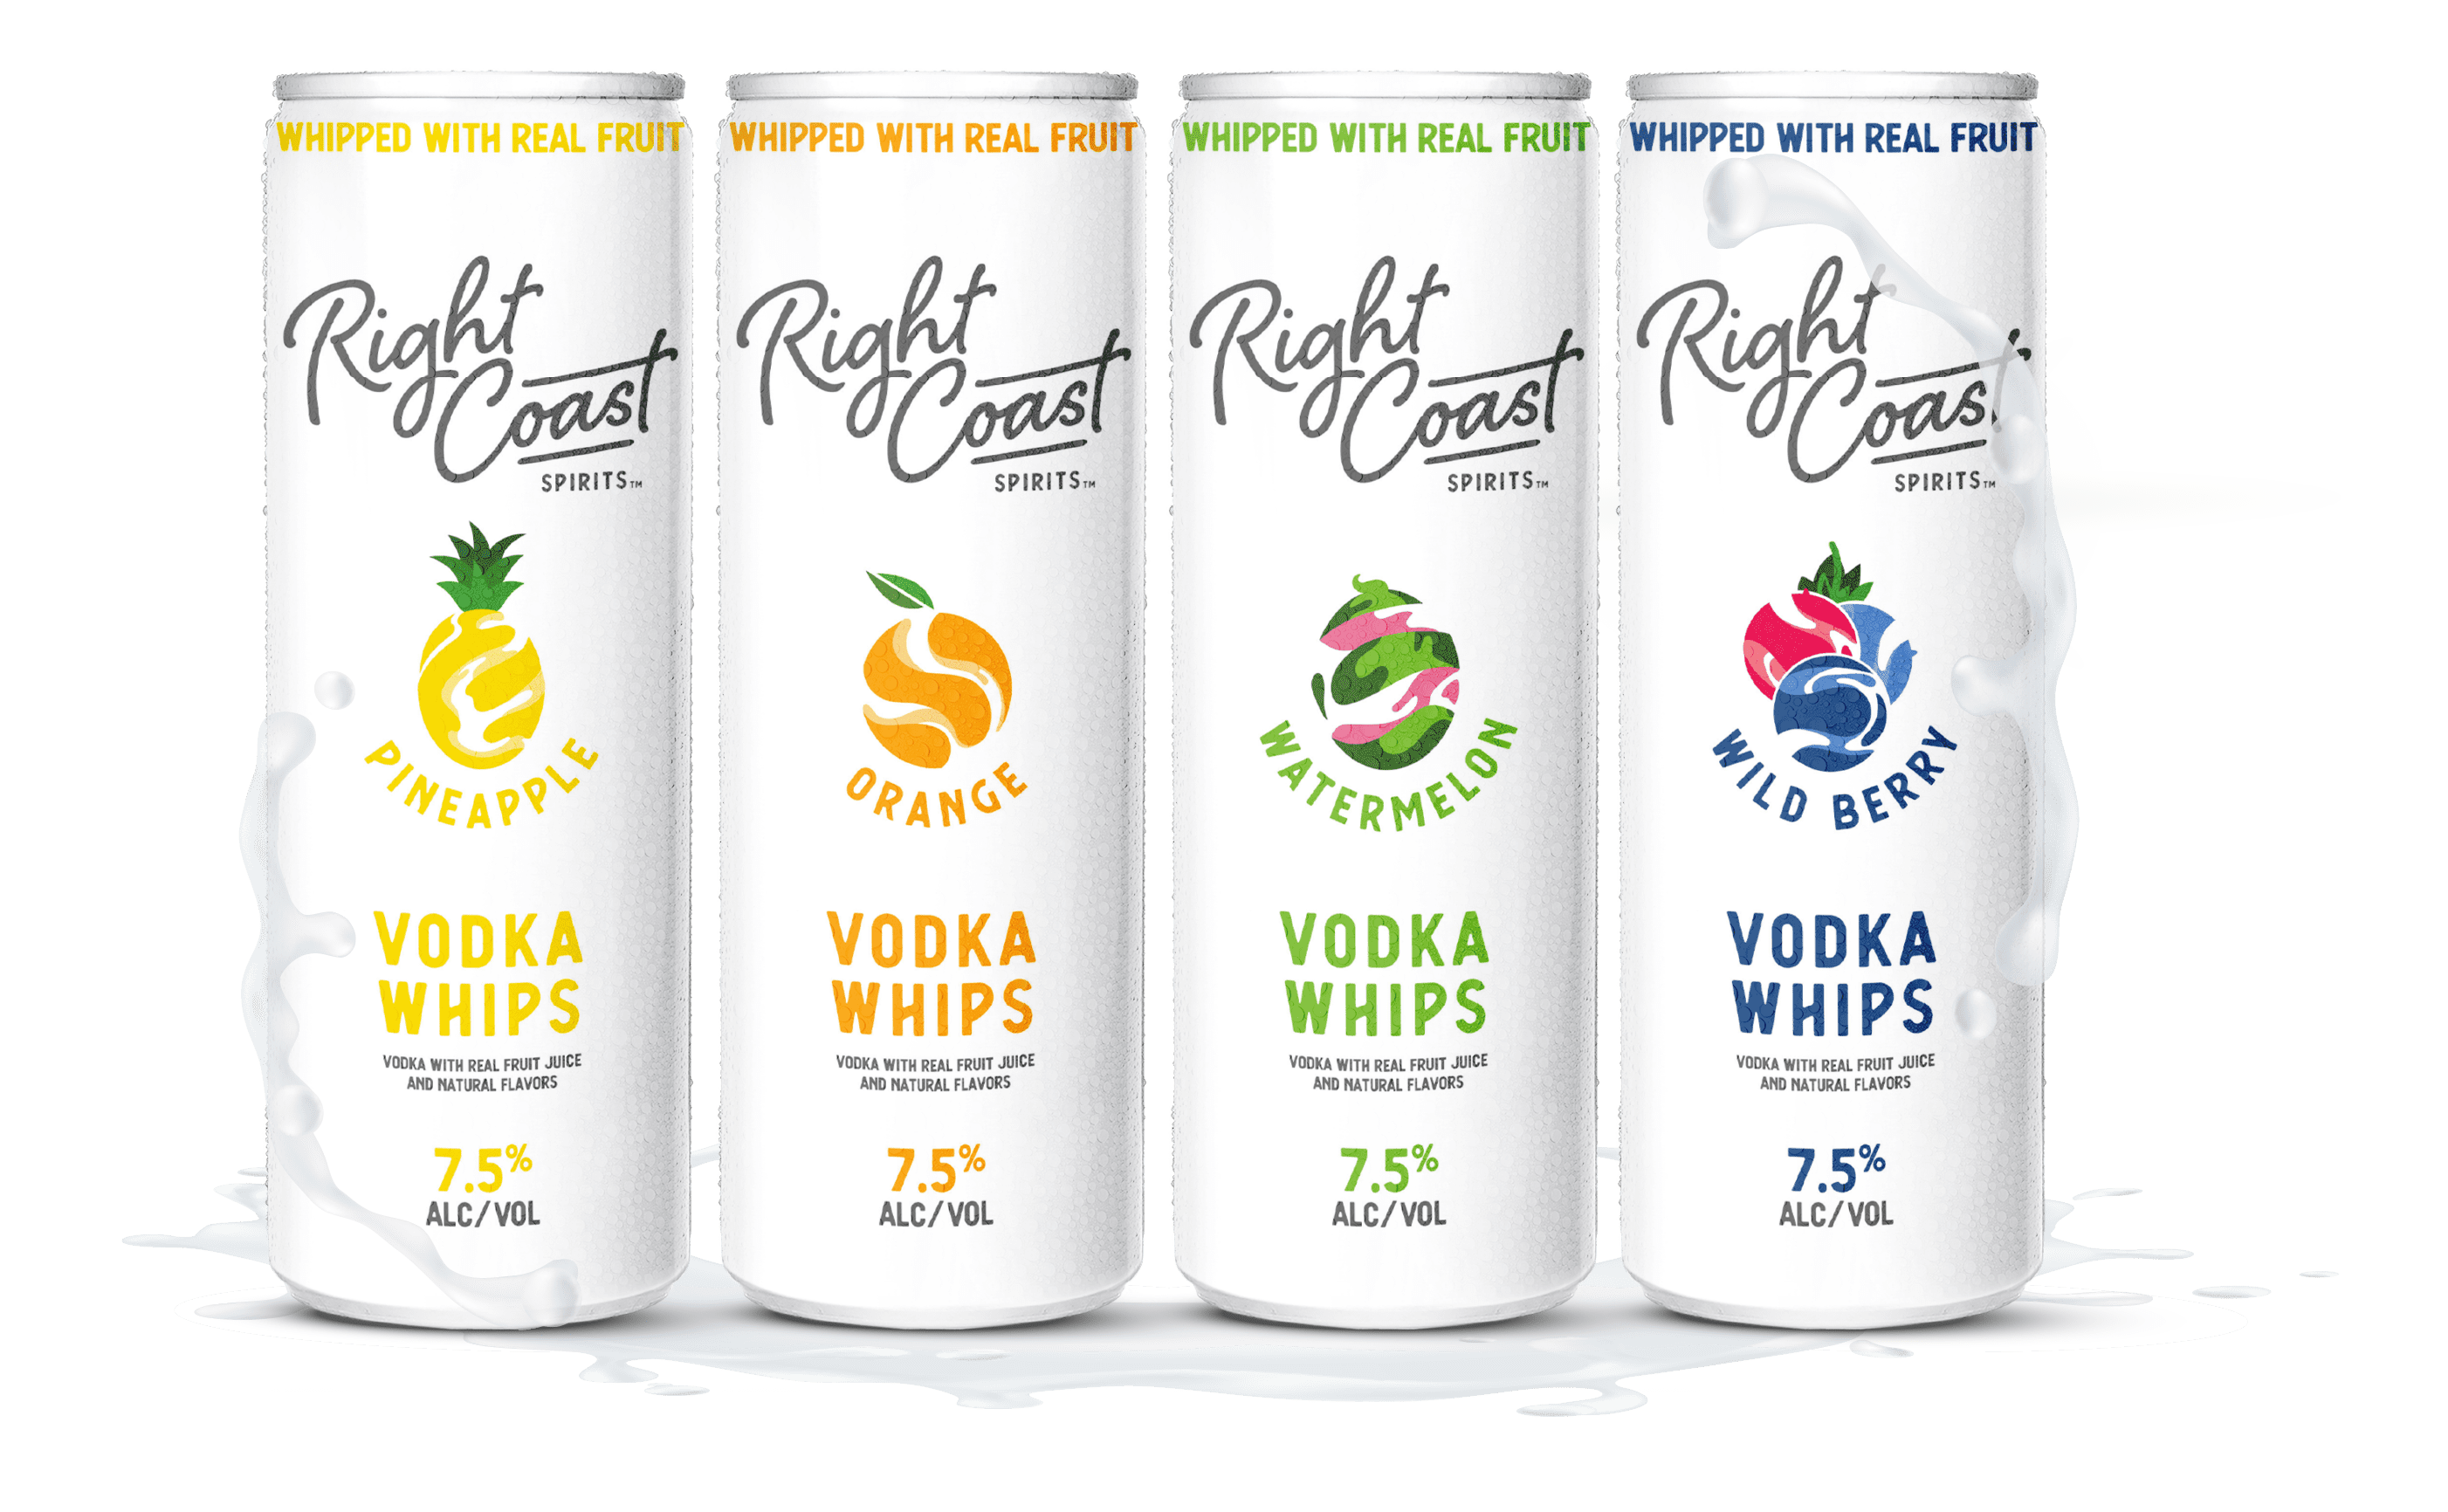 Right Coast Sprits introduce Vodka Whips